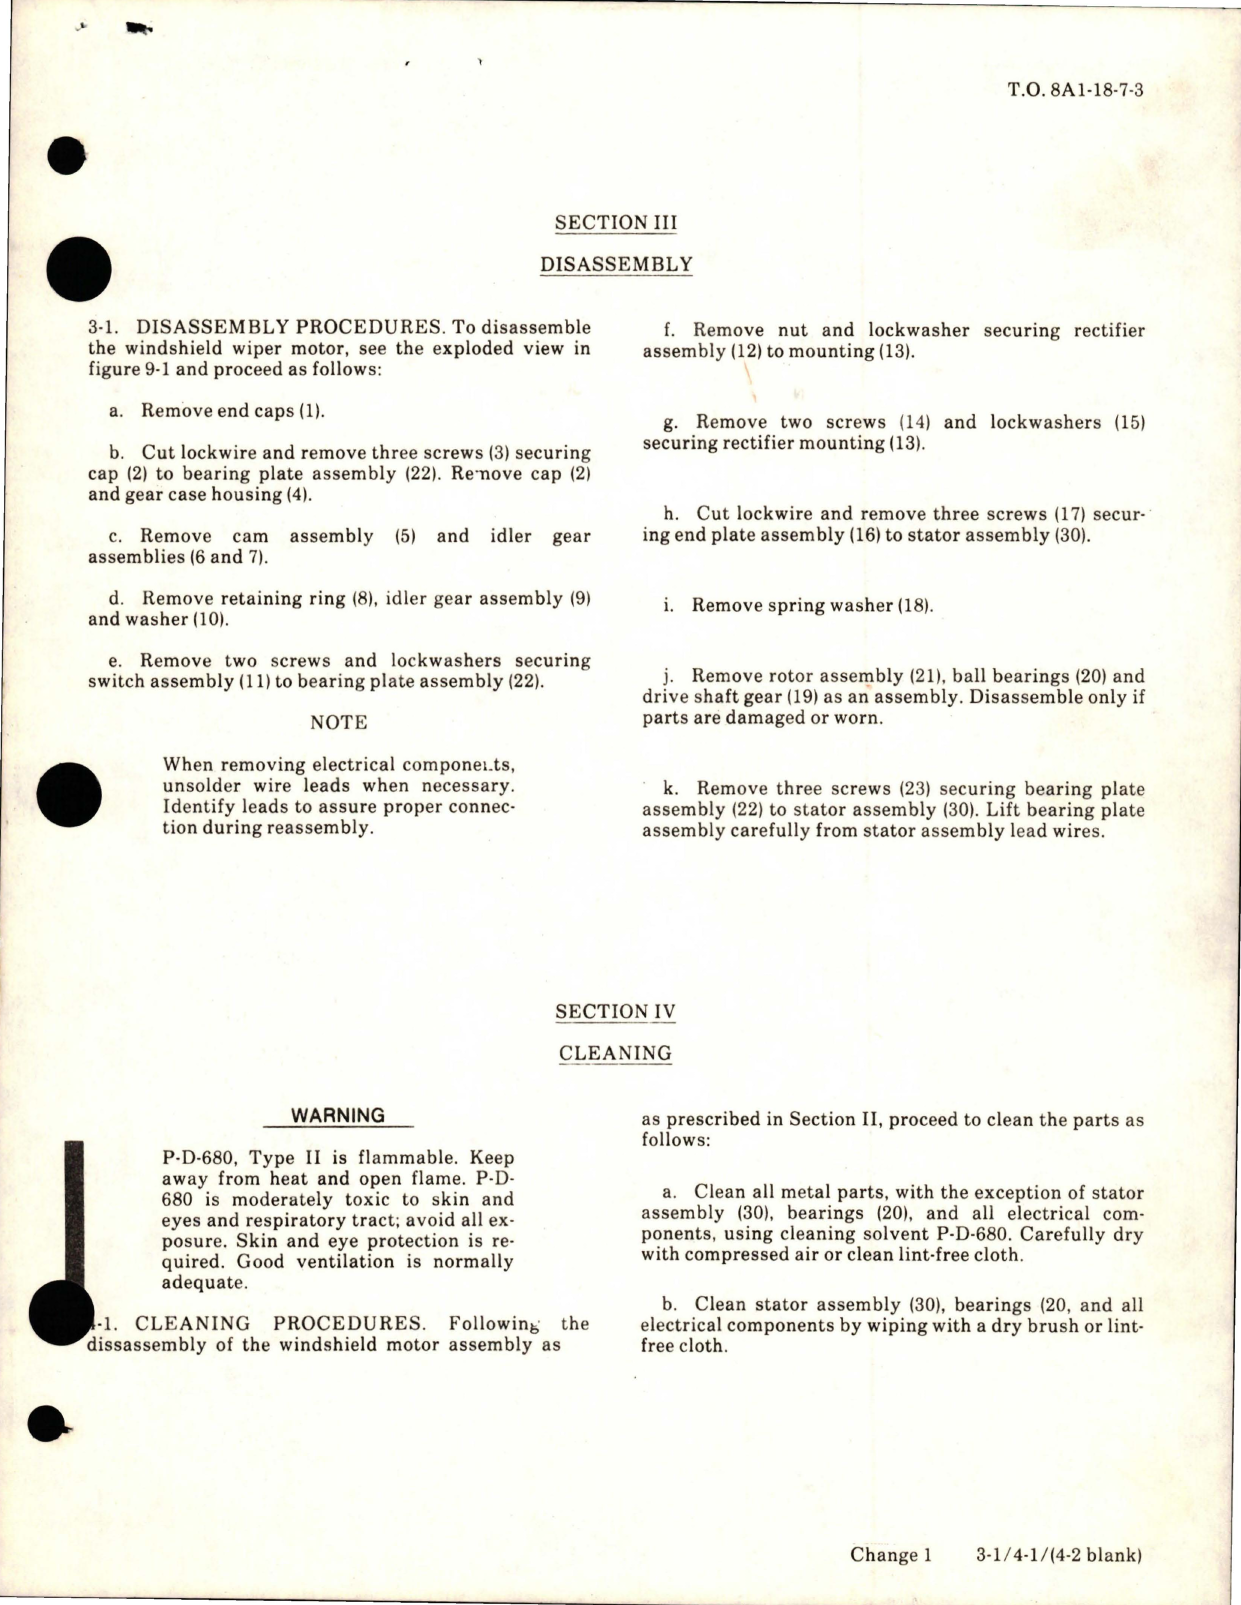 Sample page 7 from AirCorps Library document: Overhaul Instructions with Illustrated Parts Breakdown for Windshield Wiper Motor - Part XW21157-2 